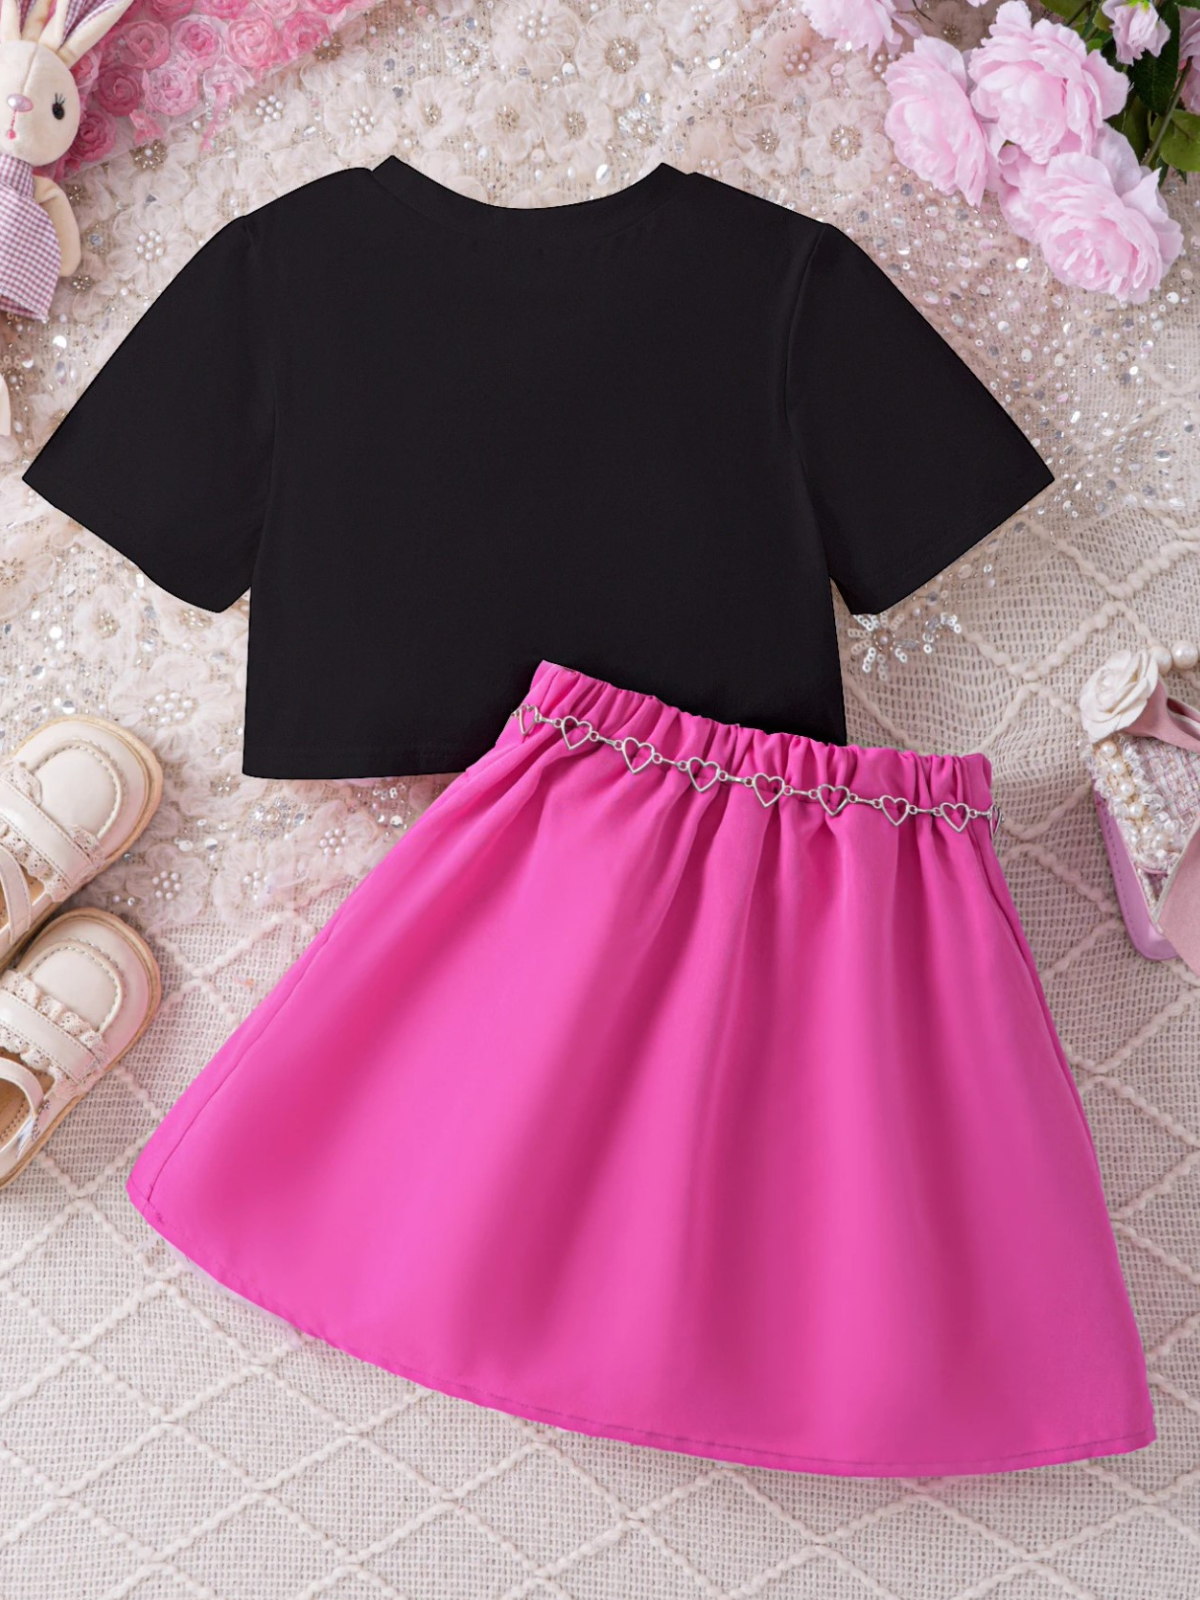 Mia Belle Girls Top And Pleated Skirt Set | Girls Summer Outfits